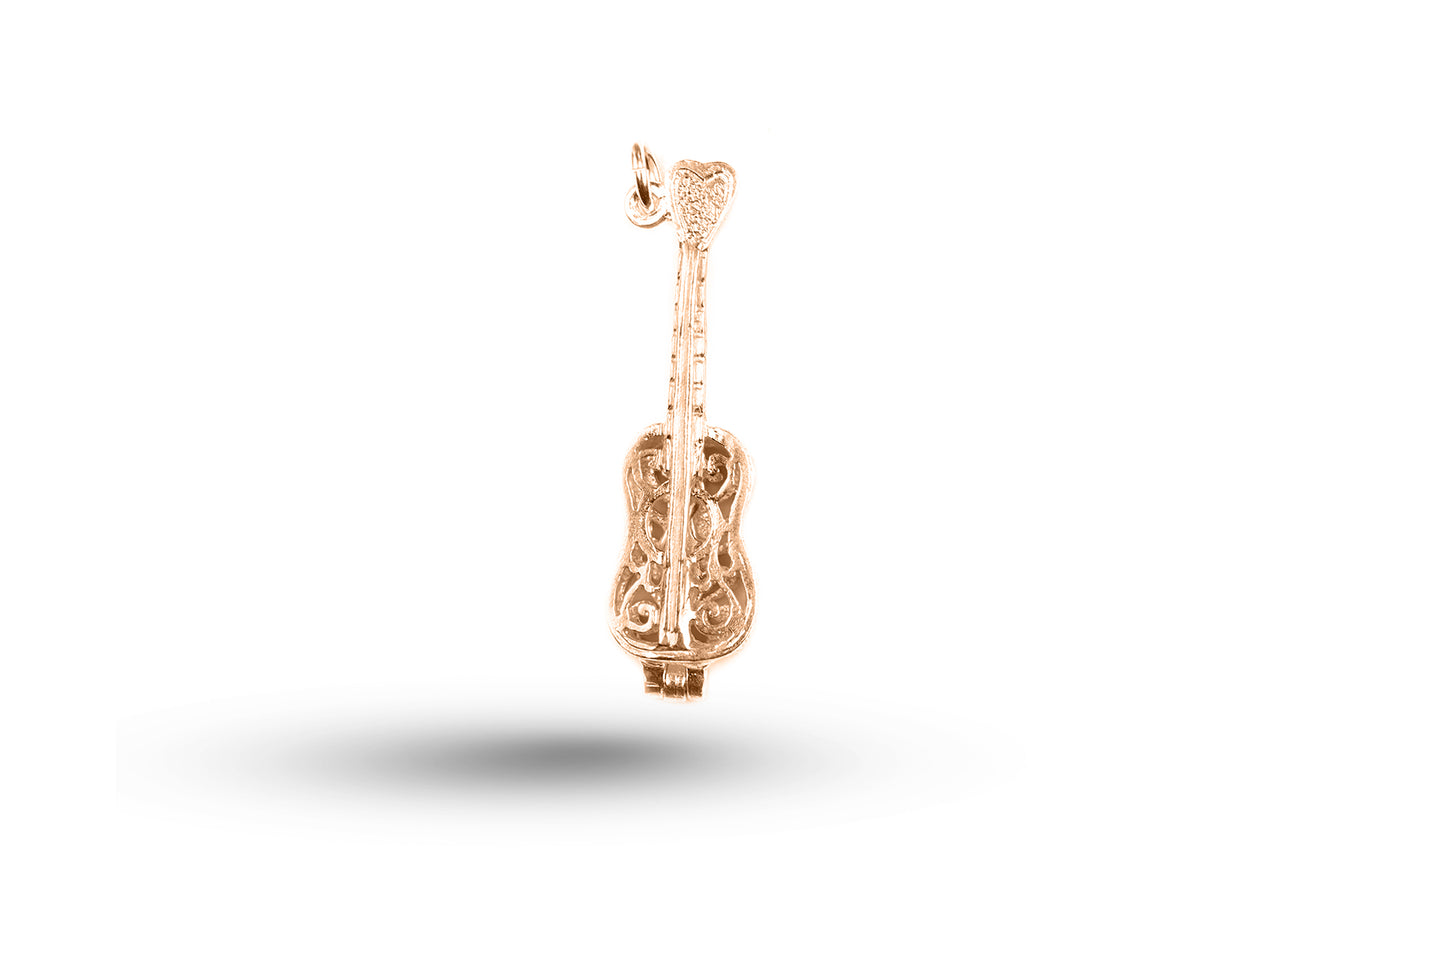 Rose gold Opening Guitar charm.